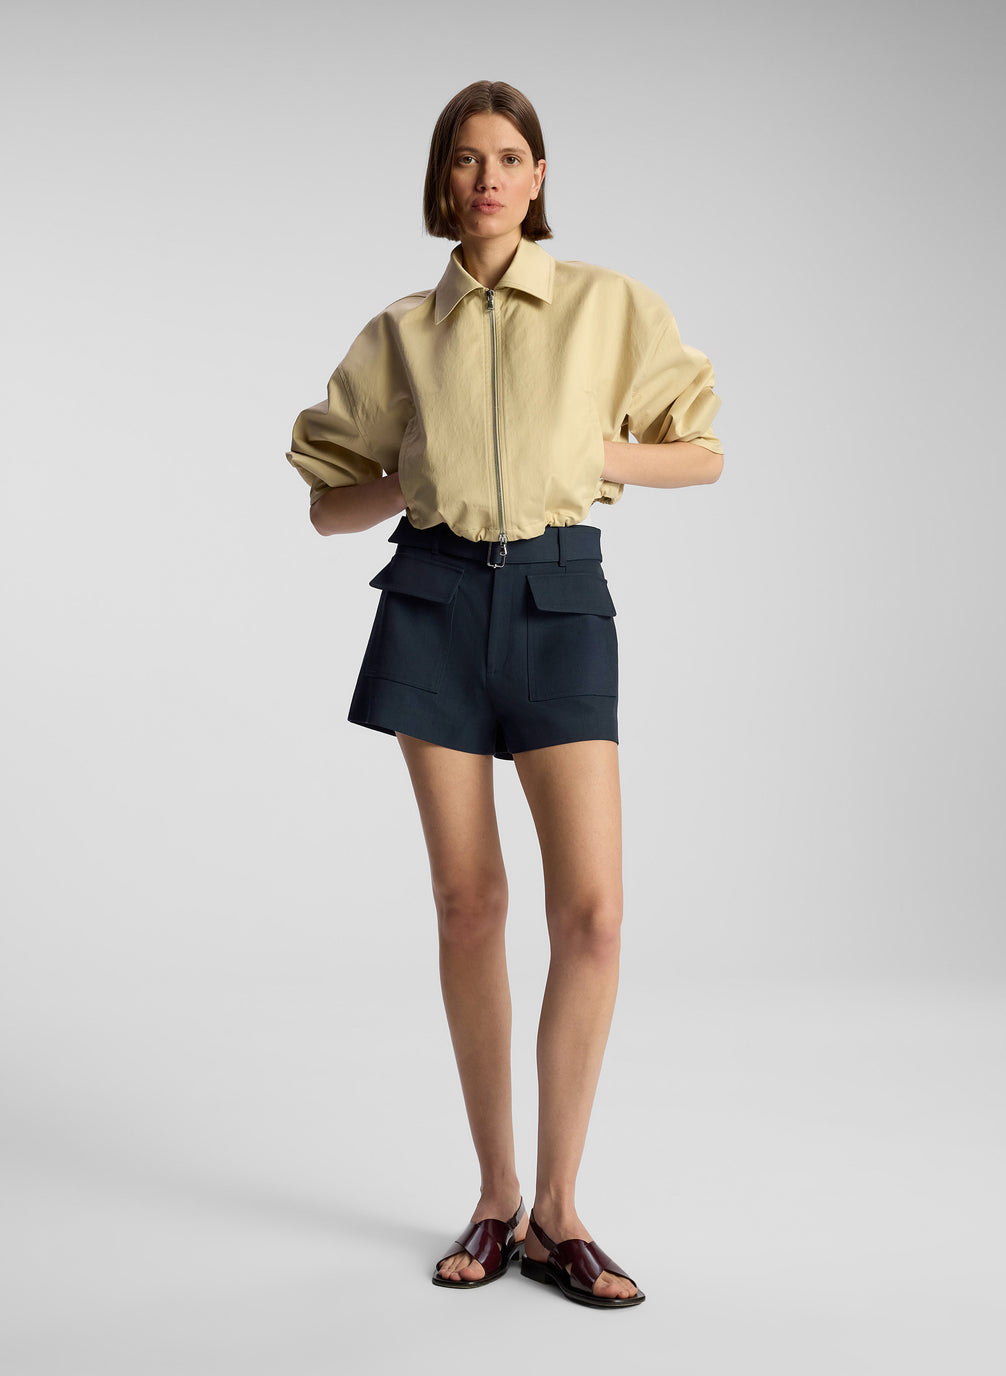 front view of woman wearing tan jacket, cream bodysuit, and navy blue shorts